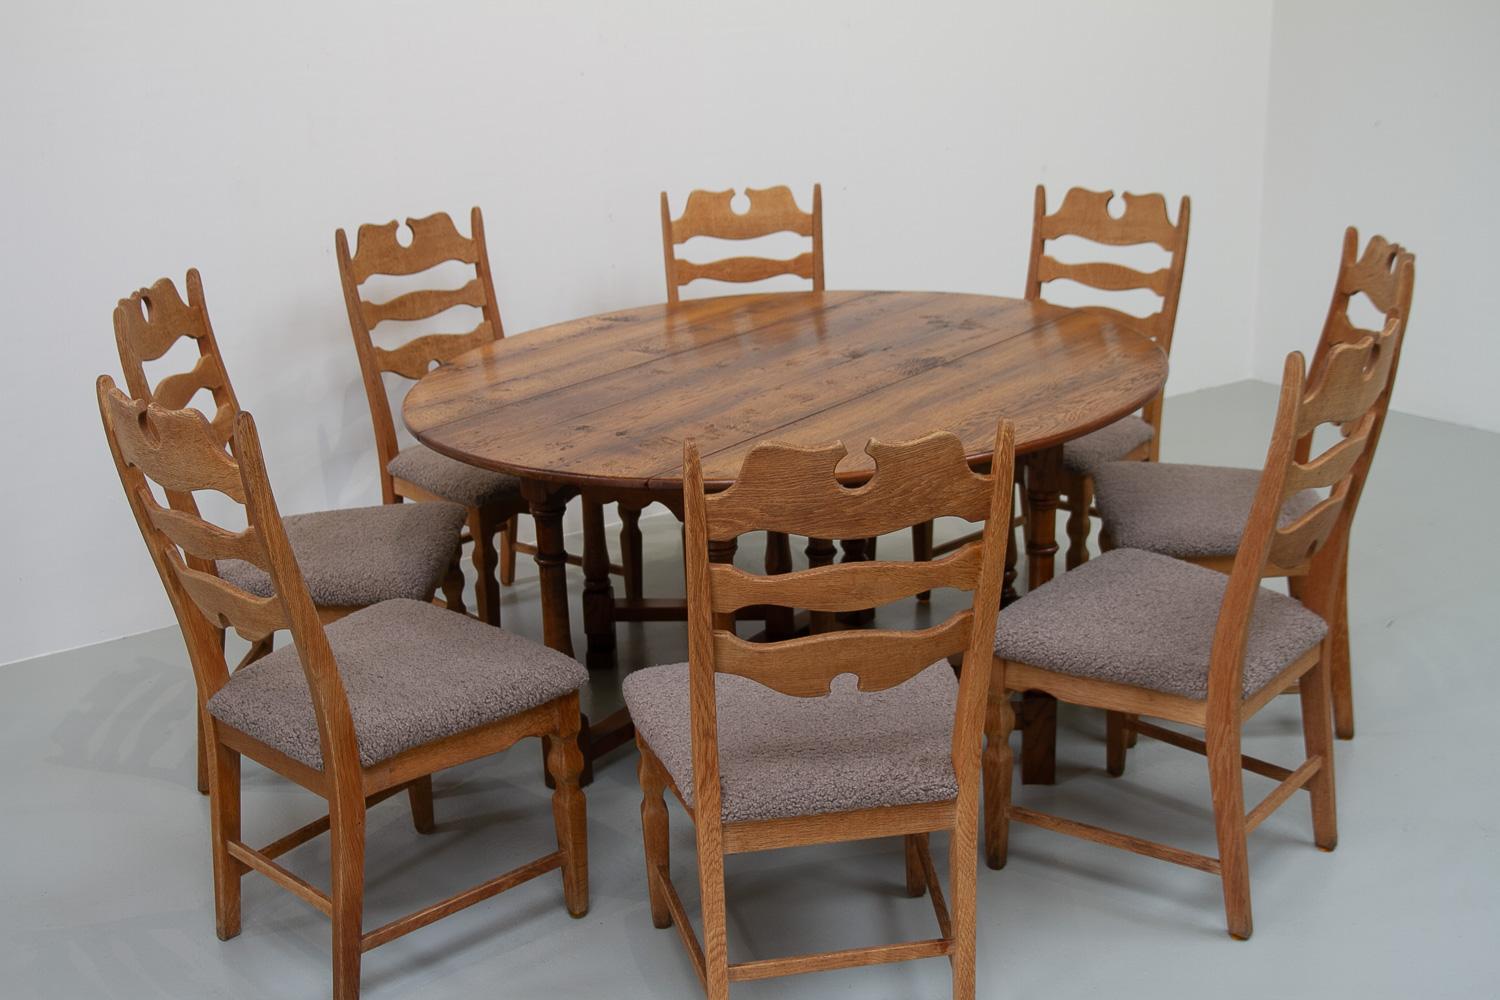 Danish Modern High Back Razor Blade Oak Chairs by Henning/Henry Kjærnulf, for EG Møbler, Denmark 1960s. Set of eight.

Vintage Danish dining chairs in solid nordic oak. Seats have been reupholstered with new high density foam and beige/light brown